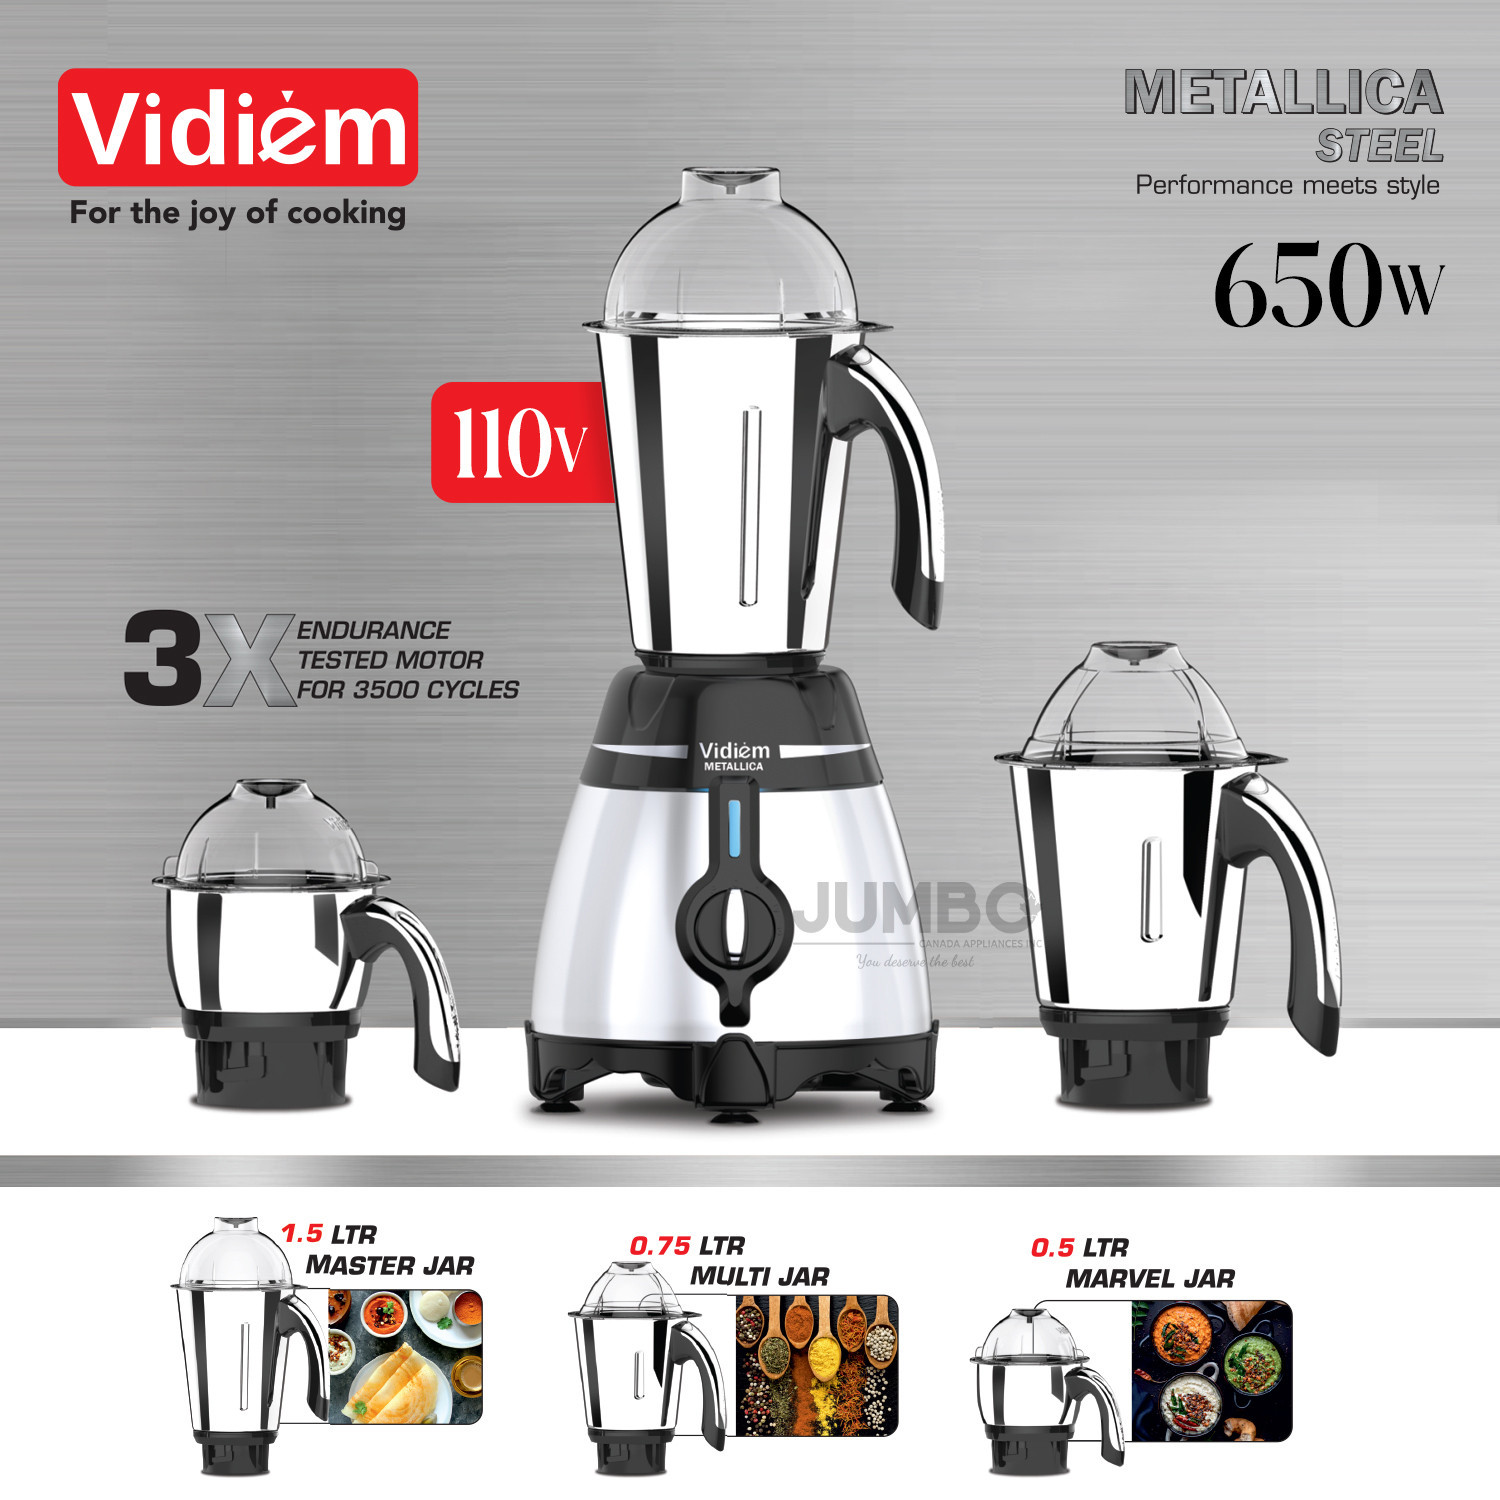 vidiem-metallica-steele-650w-110v-stainless-steel-jars-indian-mixer-grinder-with-spice-coffee-grinder-jar-for-use-in-canada-usa3